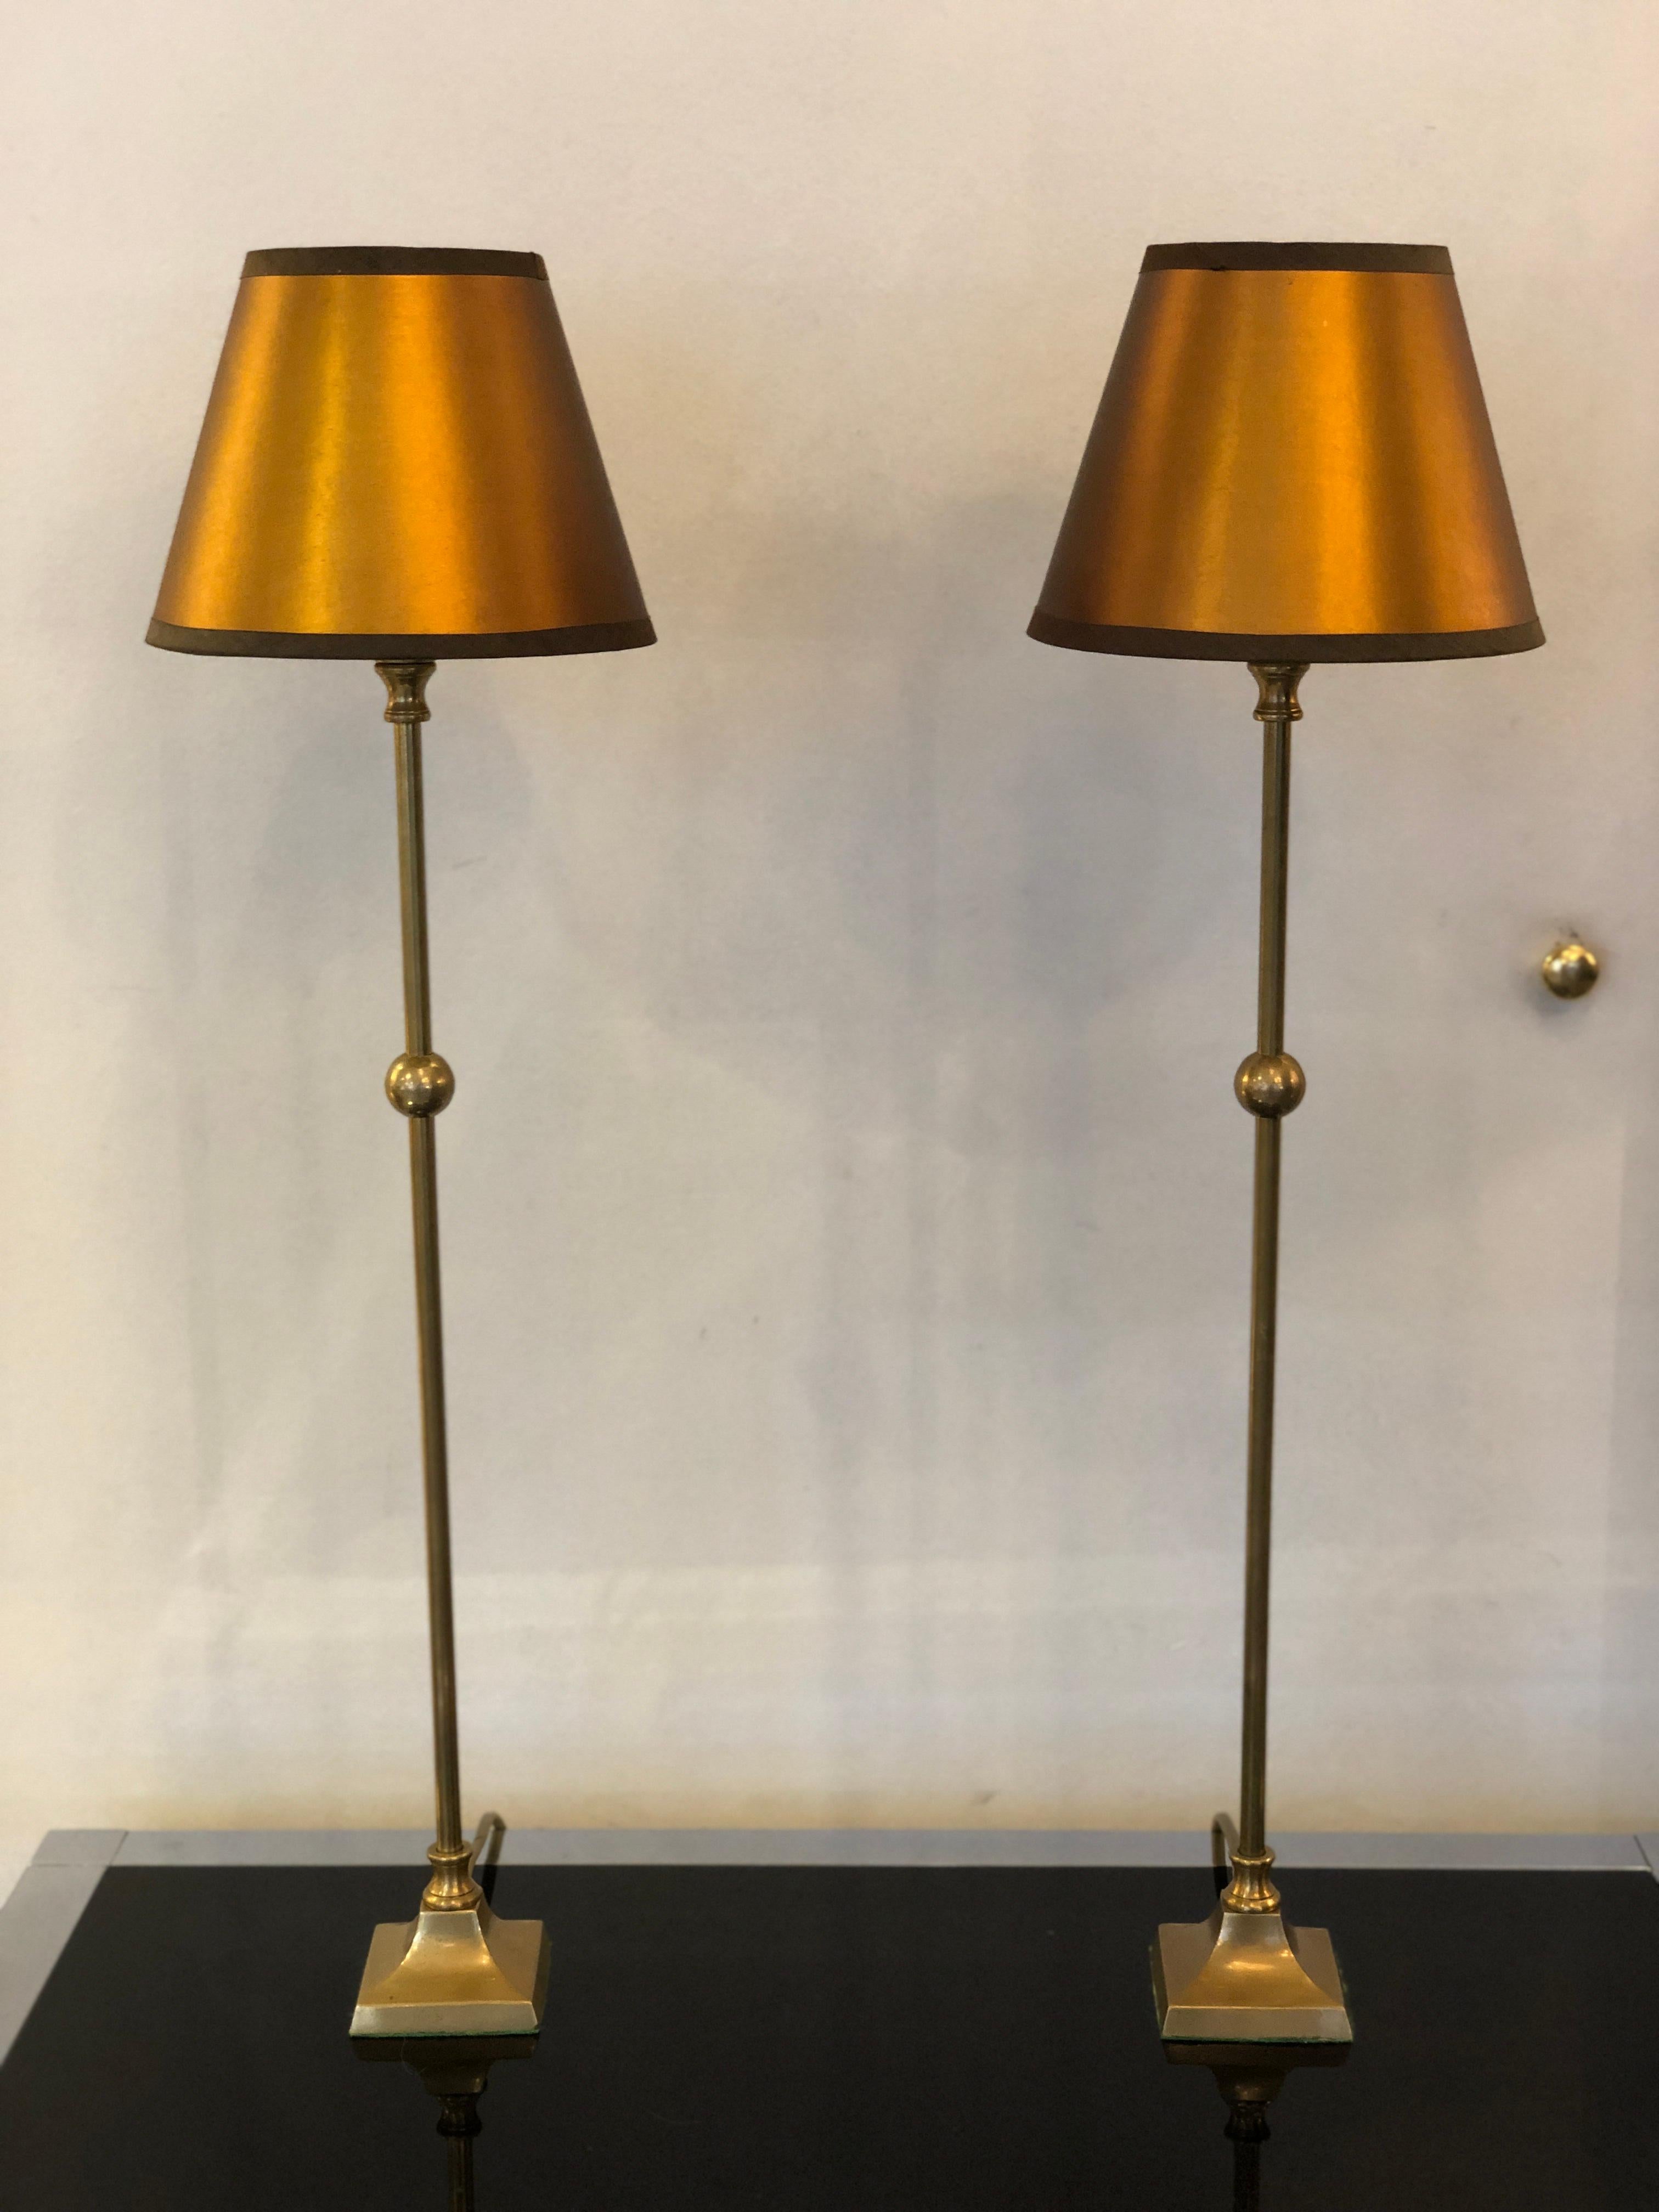 1940s French brass table lamps in their original patina.
A pair of thin and tall table lamps with small squared base and small bronze upholstery lampshades.
These lamps, for they particular size, can be used in a variety of locations from the